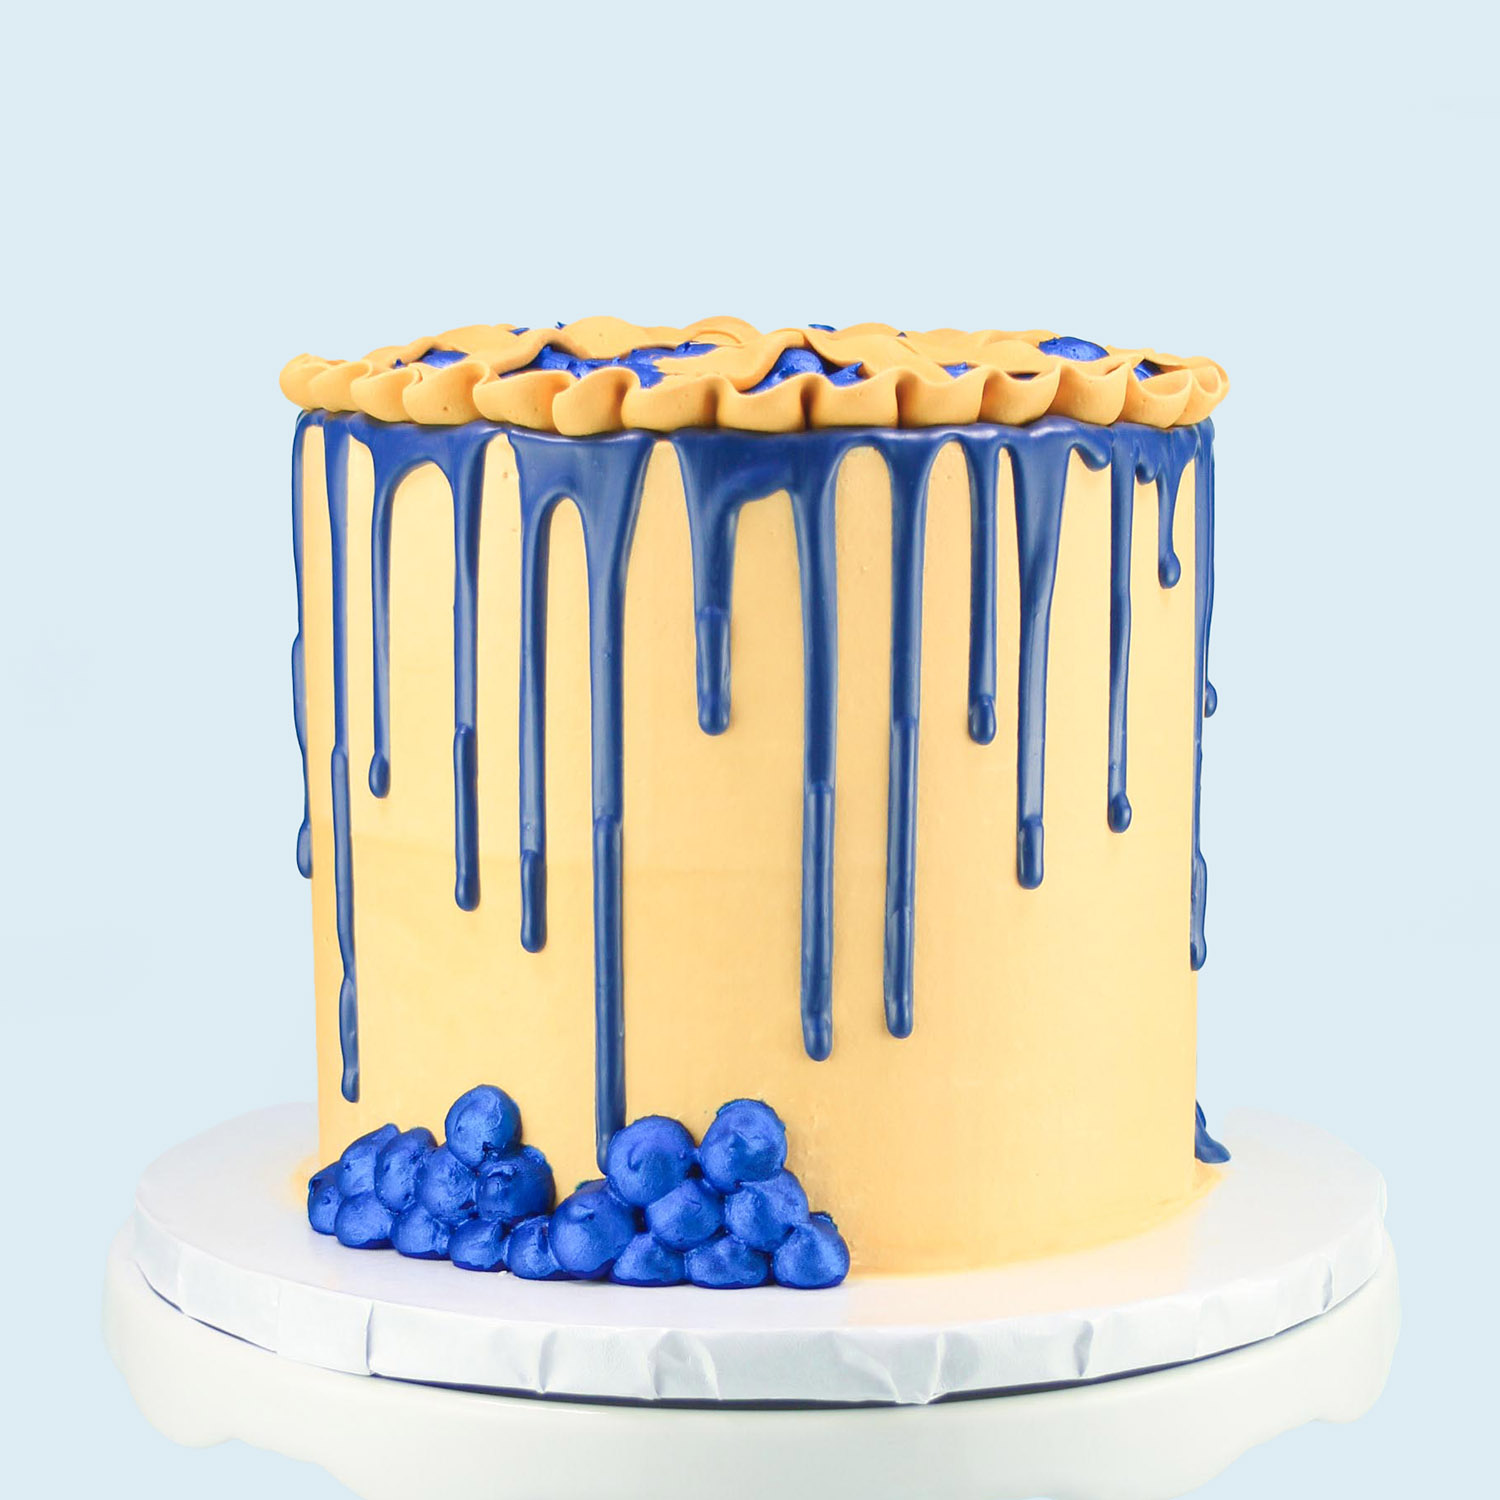 Blueberry drip on the side of the cake